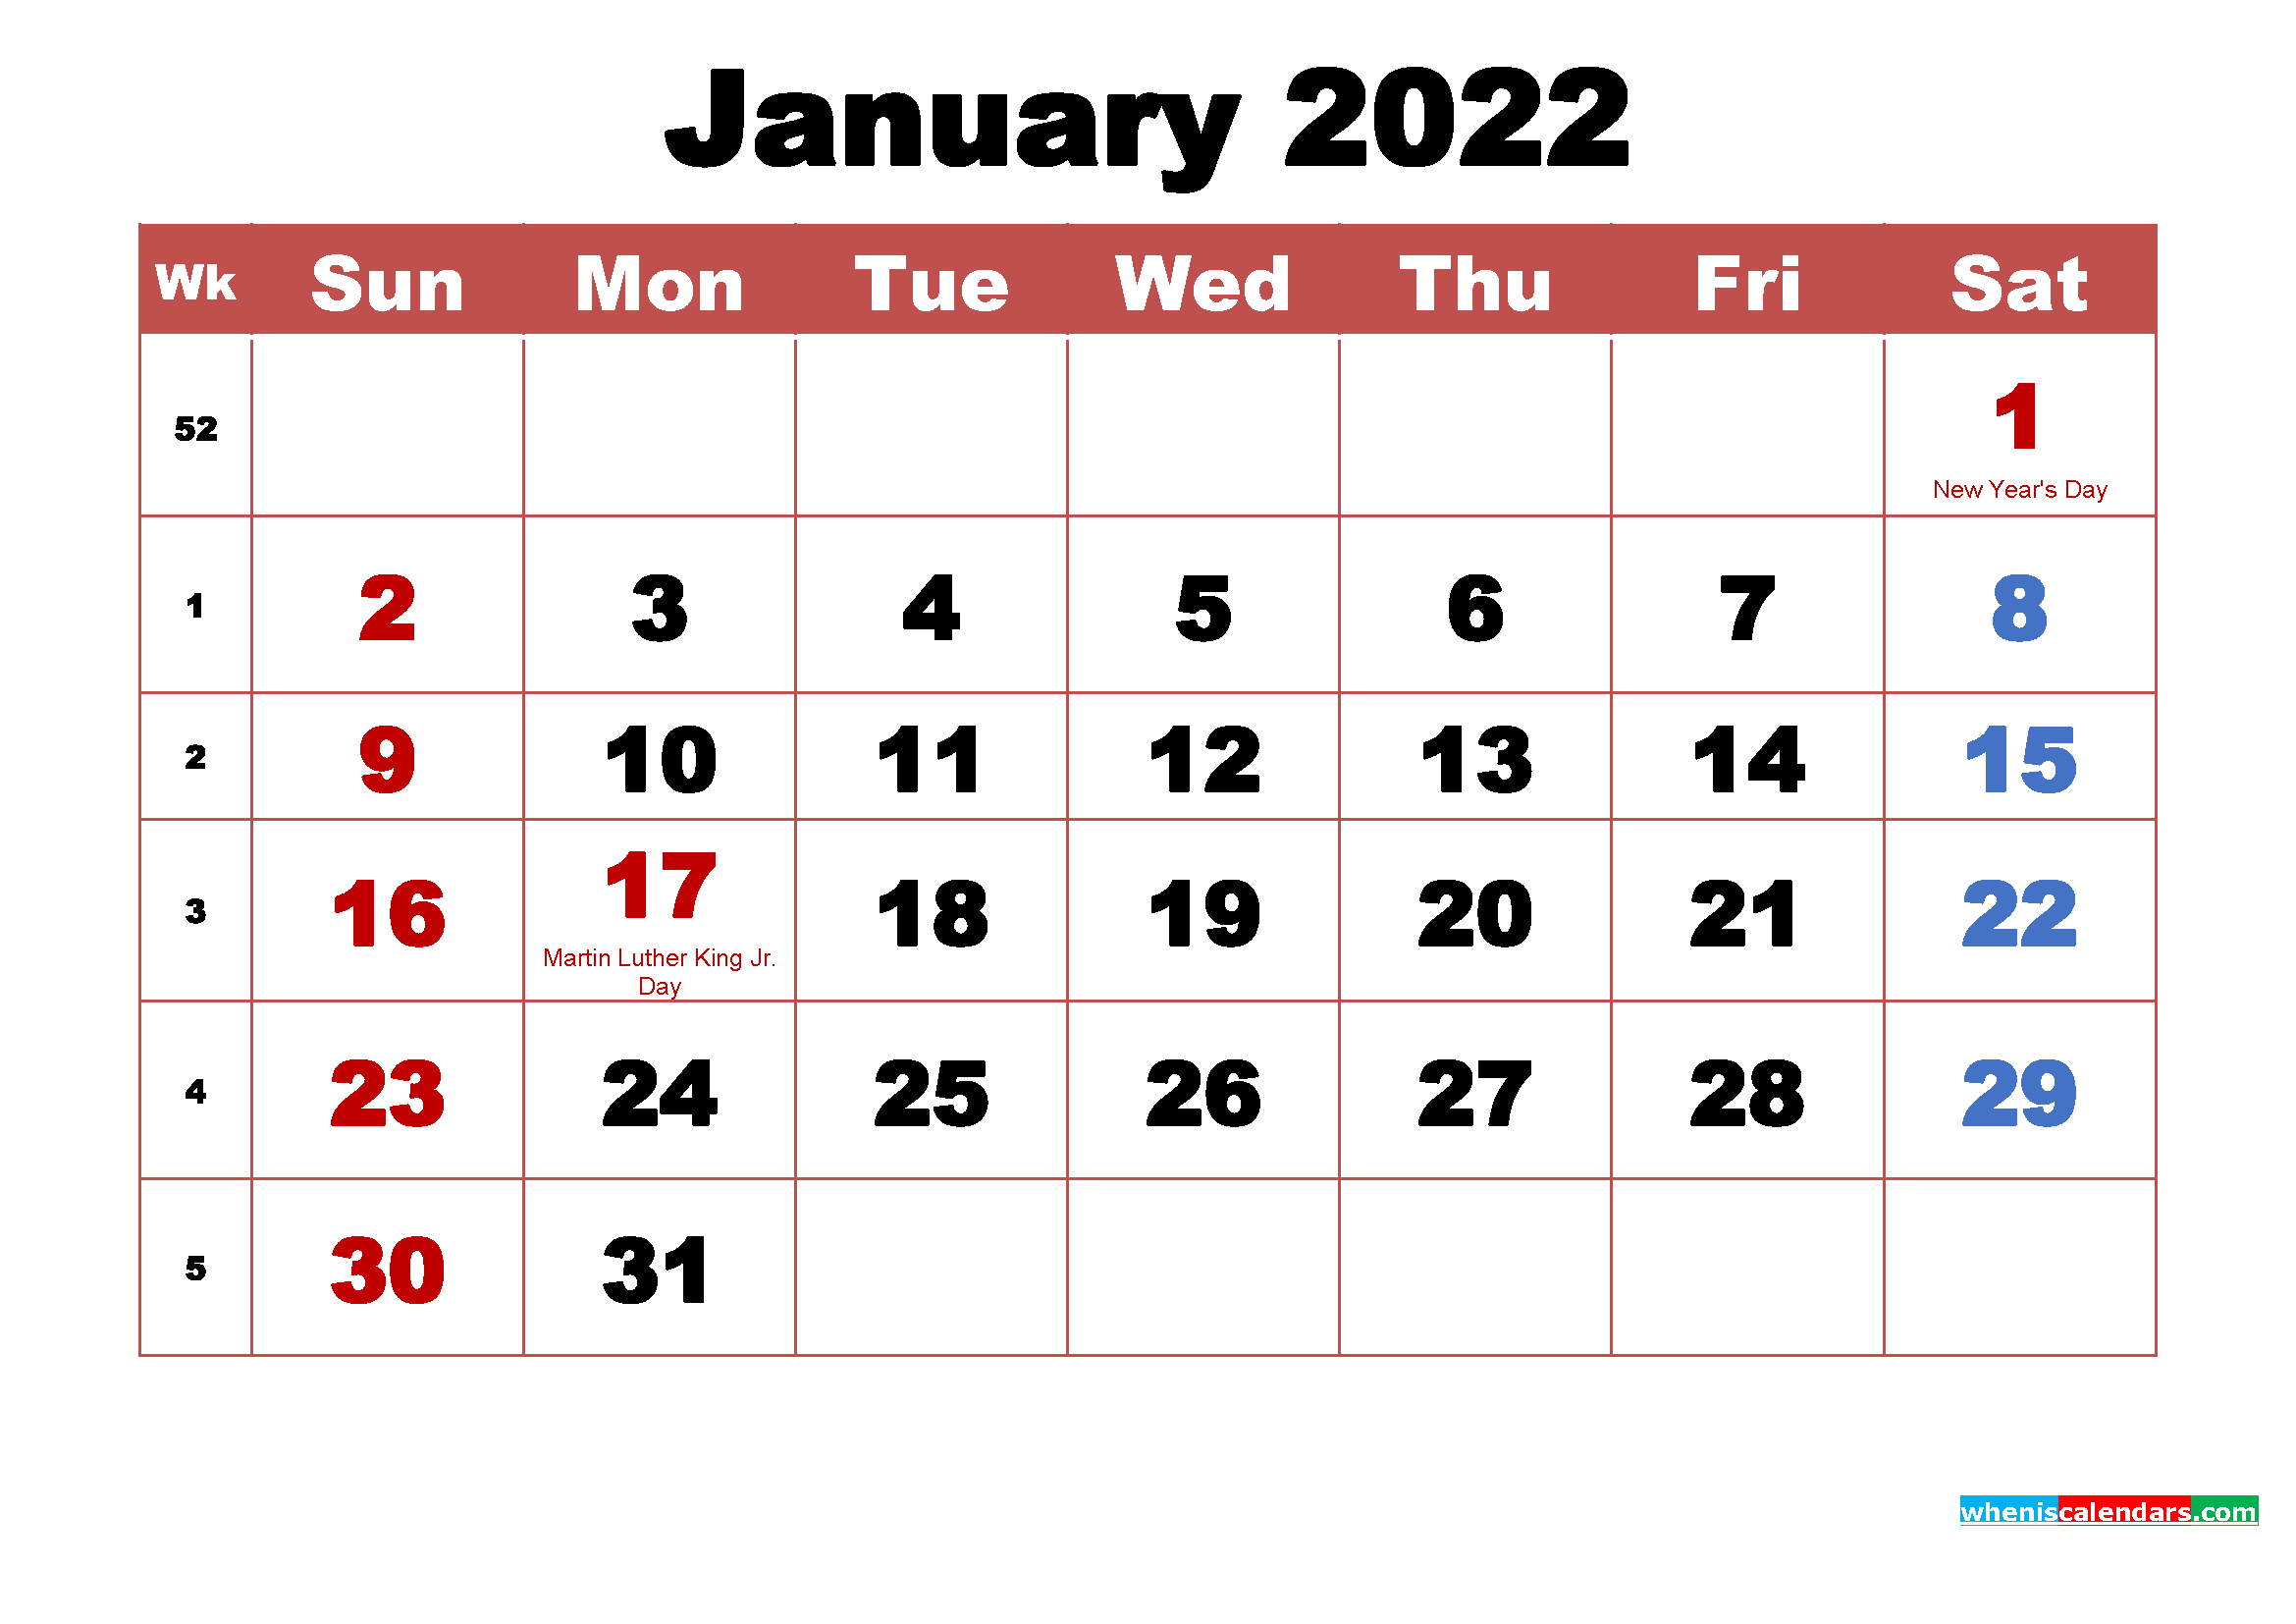 january-2022-monthly-calendar-printable-holidays-arialblk-3.png